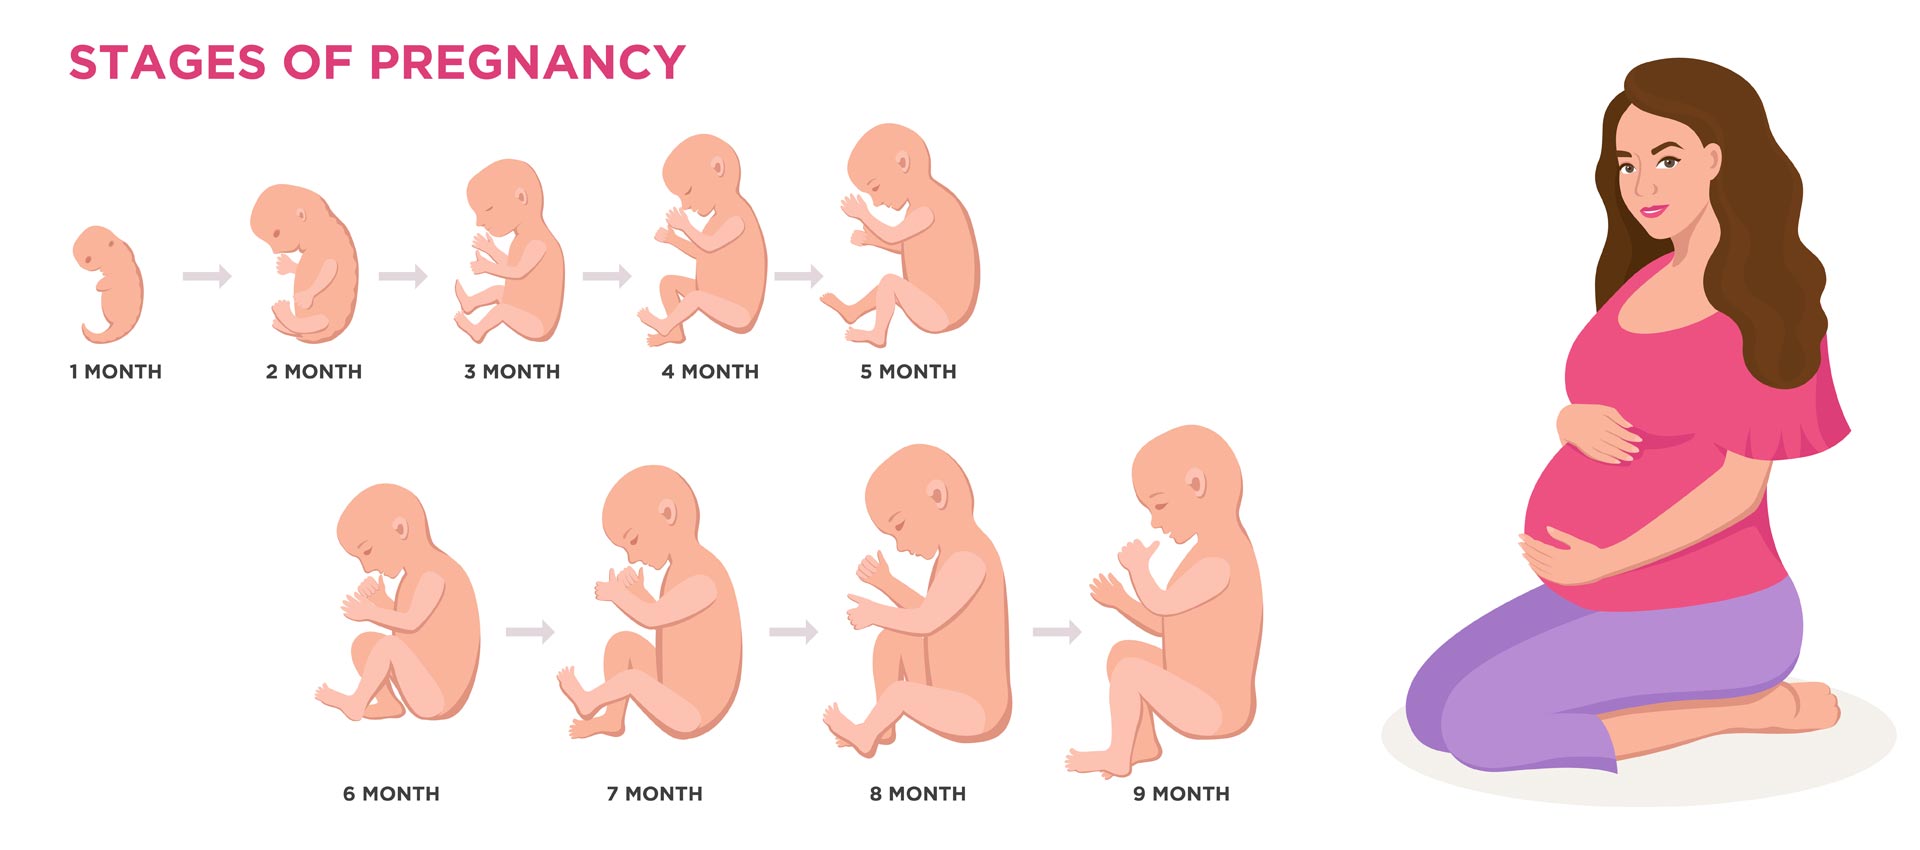 6 Months Pregnancy Baby Development: What to Expect